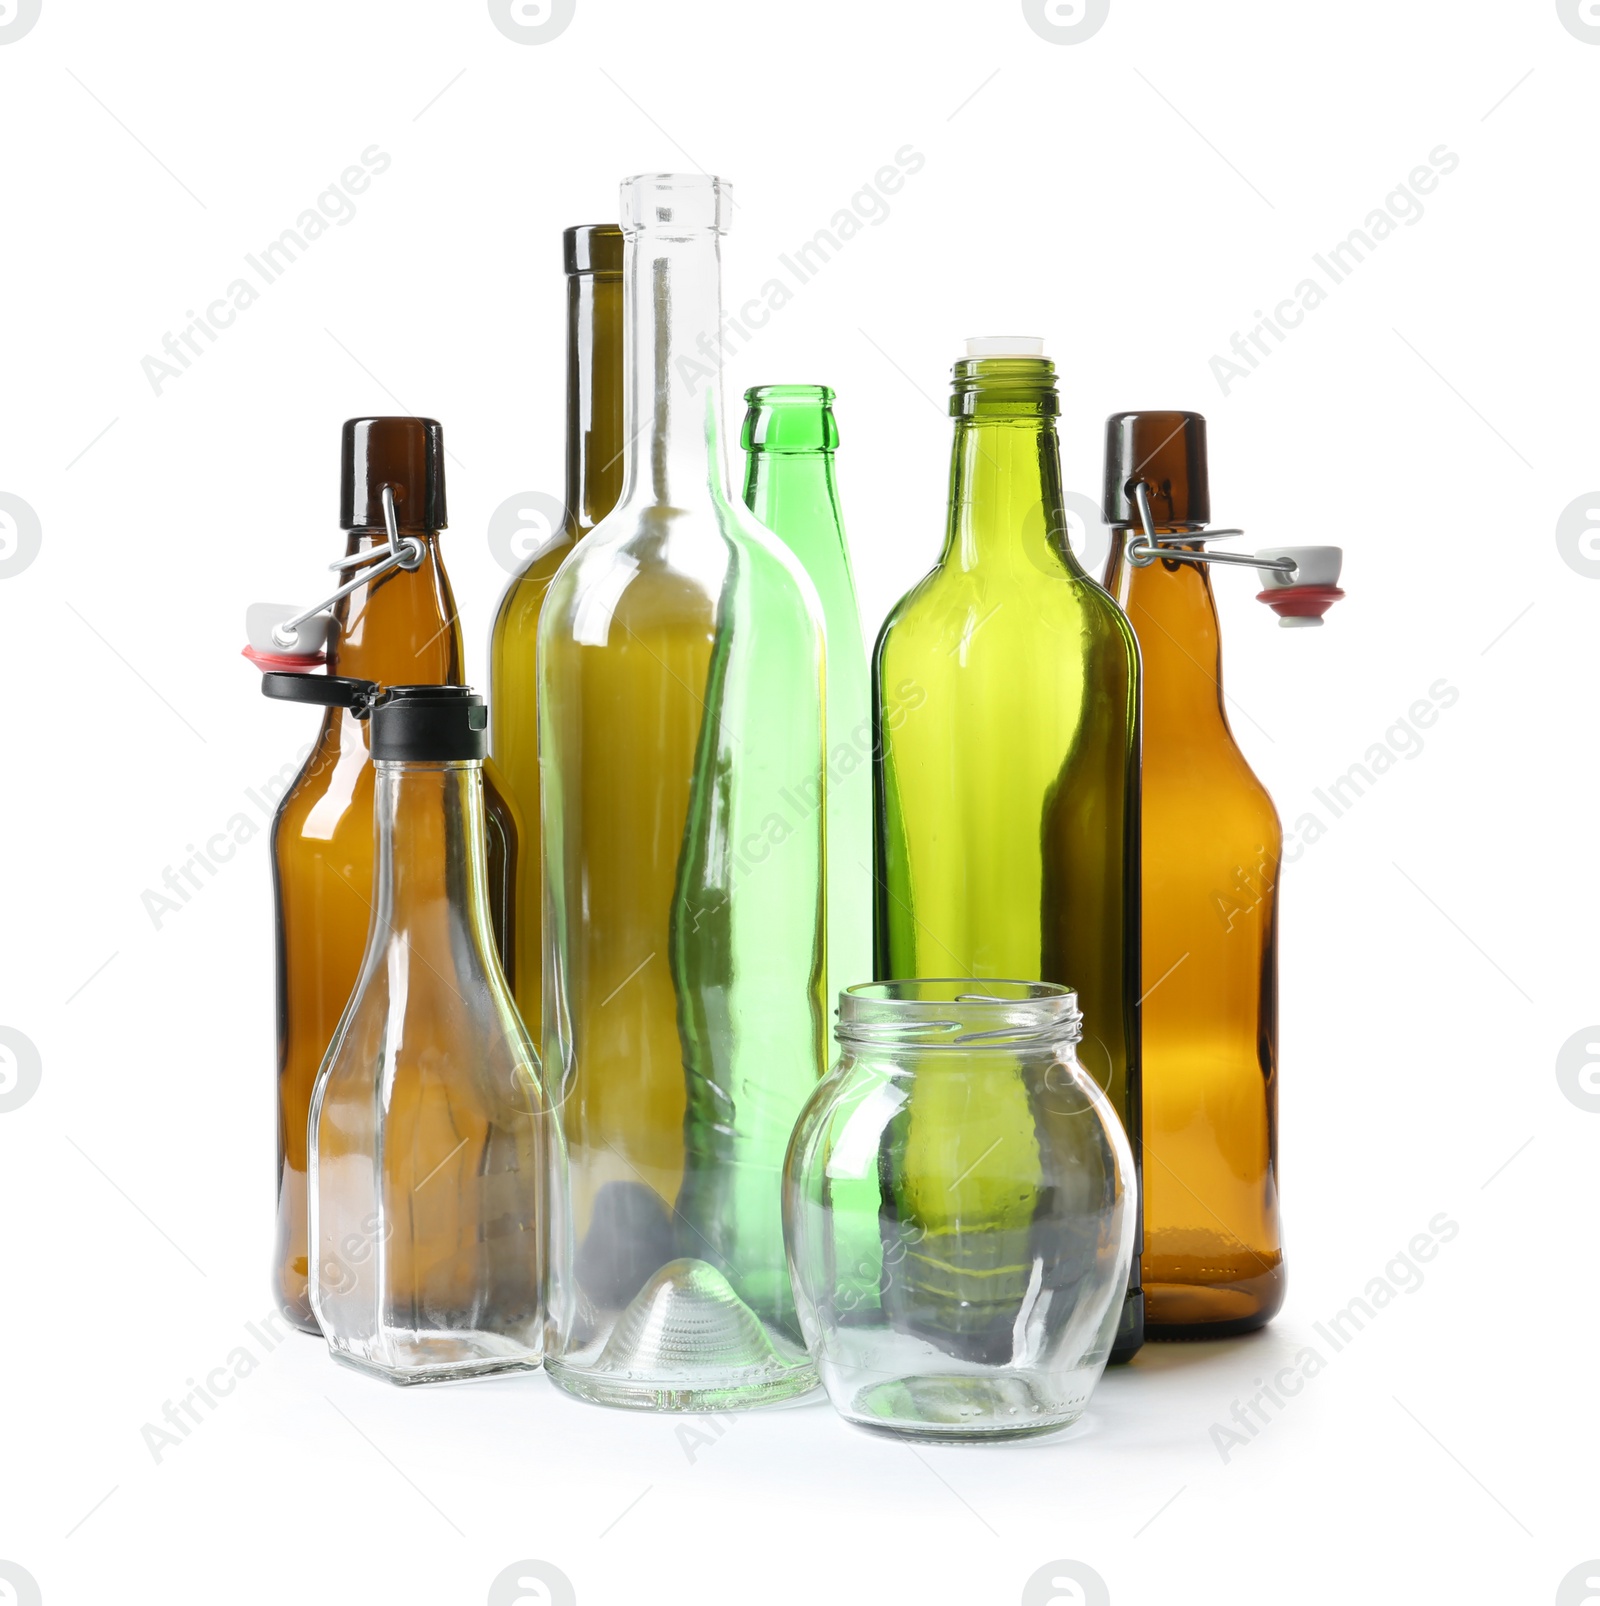 Photo of Empty glass bottles and jar on white background. Recycling problem